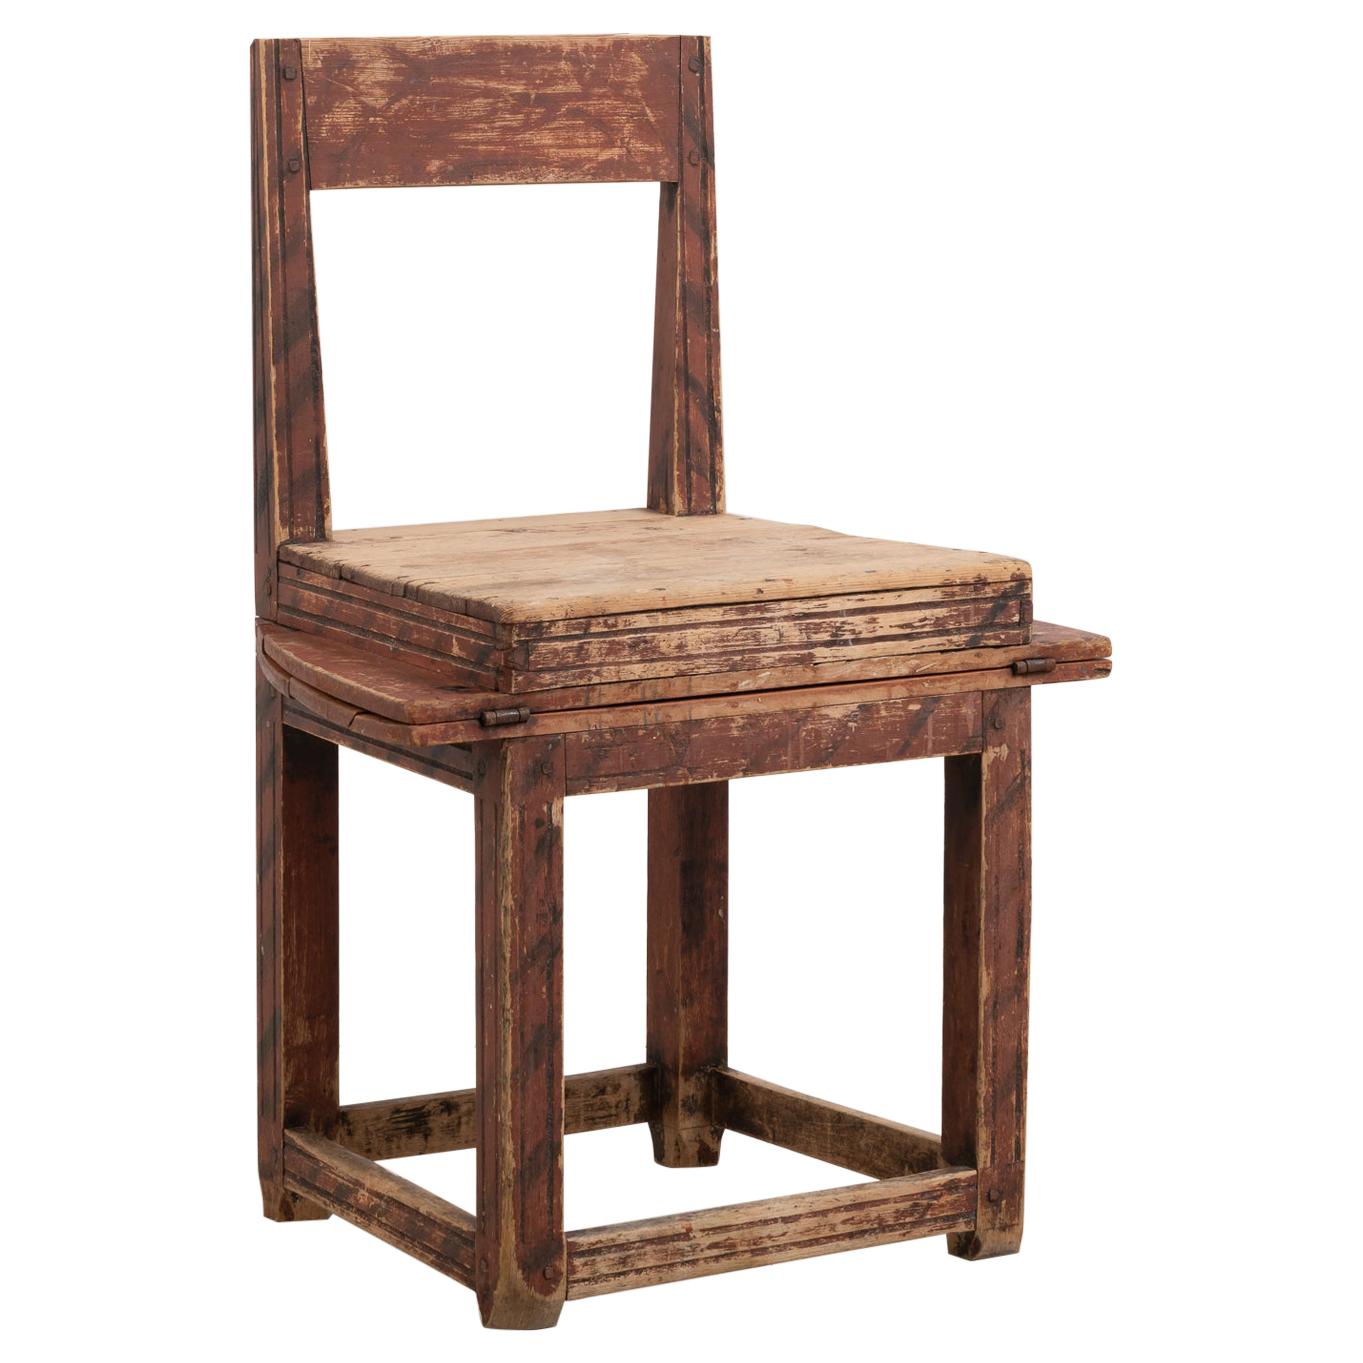 19th Century Combination Chair and Table